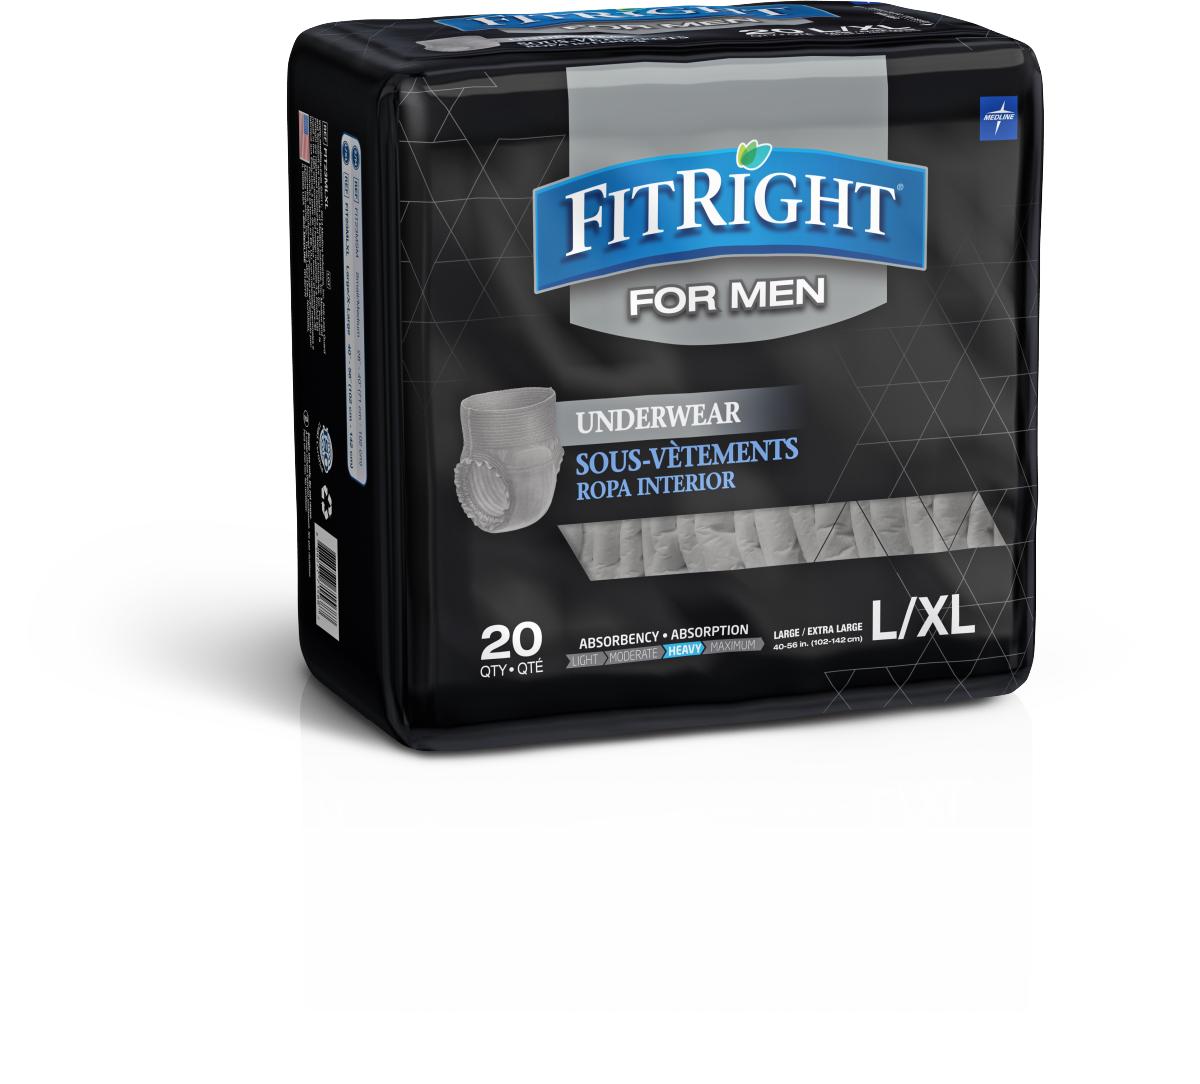 FitRight Ultra Underwear for Men,Large/X-Large Case of 80